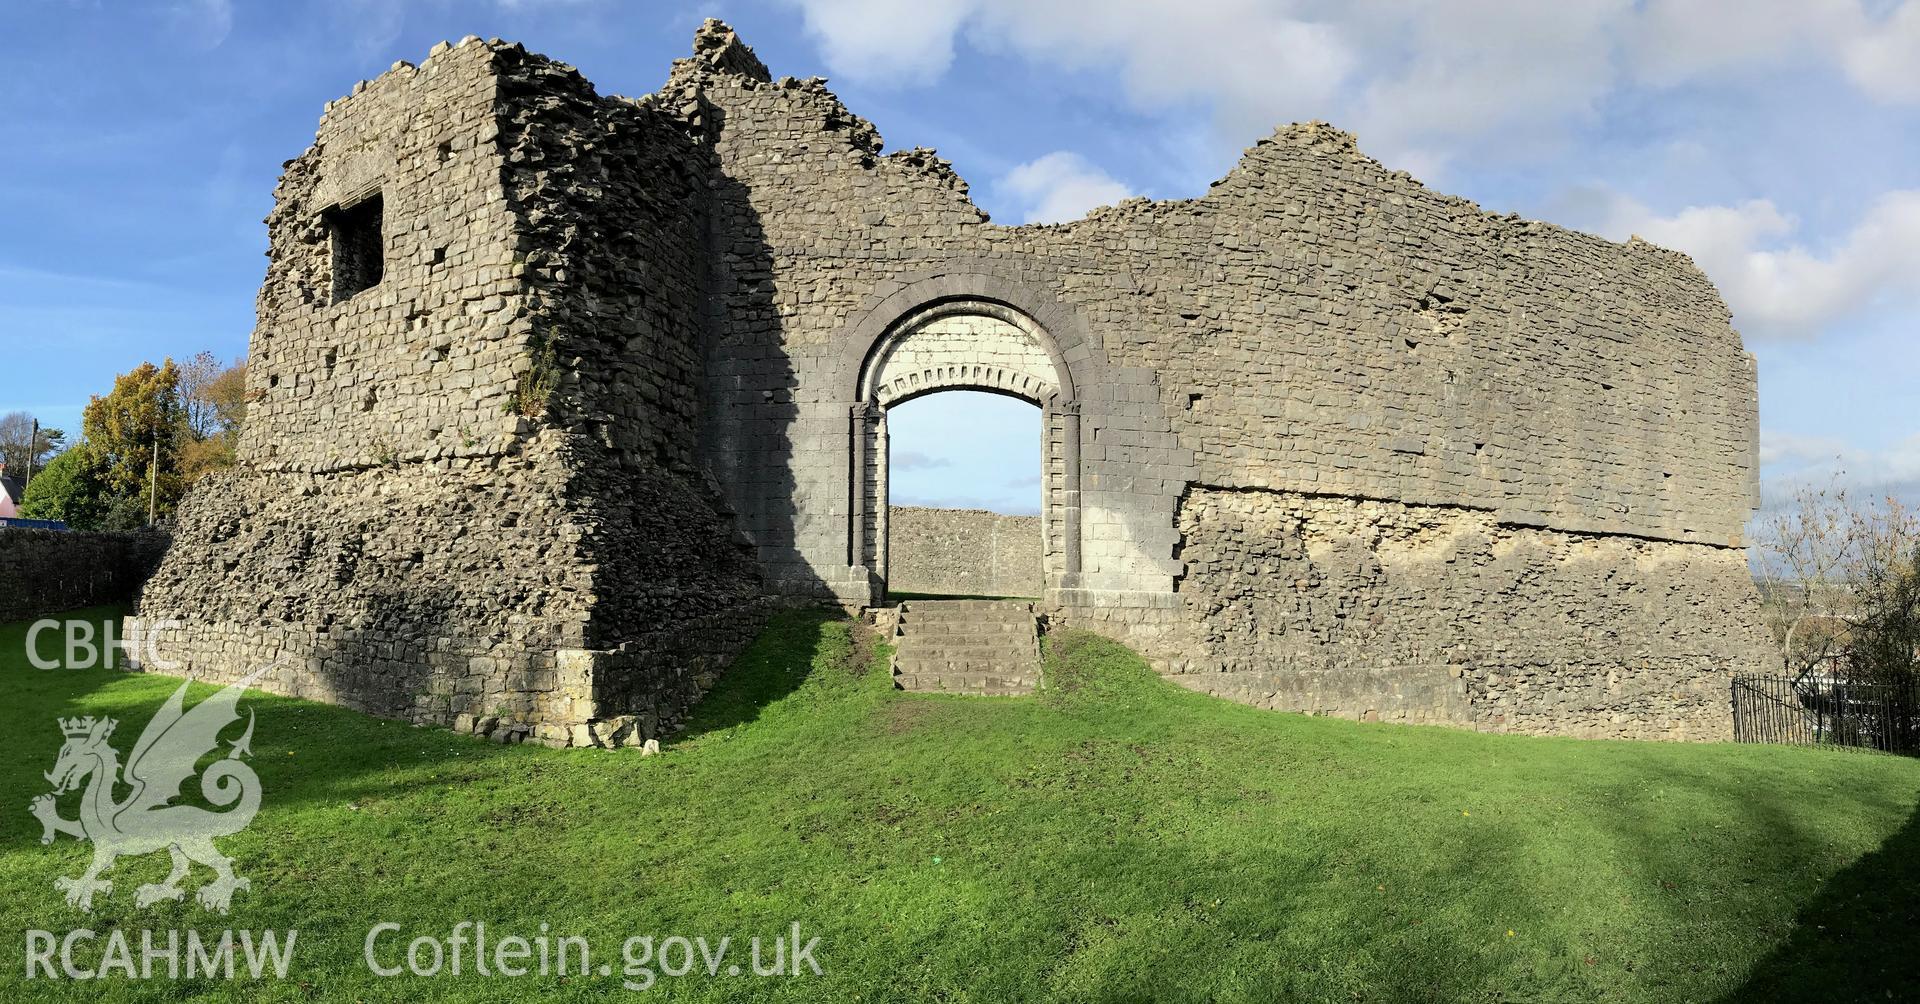 View of archway at Newcastle castle, Bridgend. Colour photograph taken by Paul R. Davis on 14th November 2018.